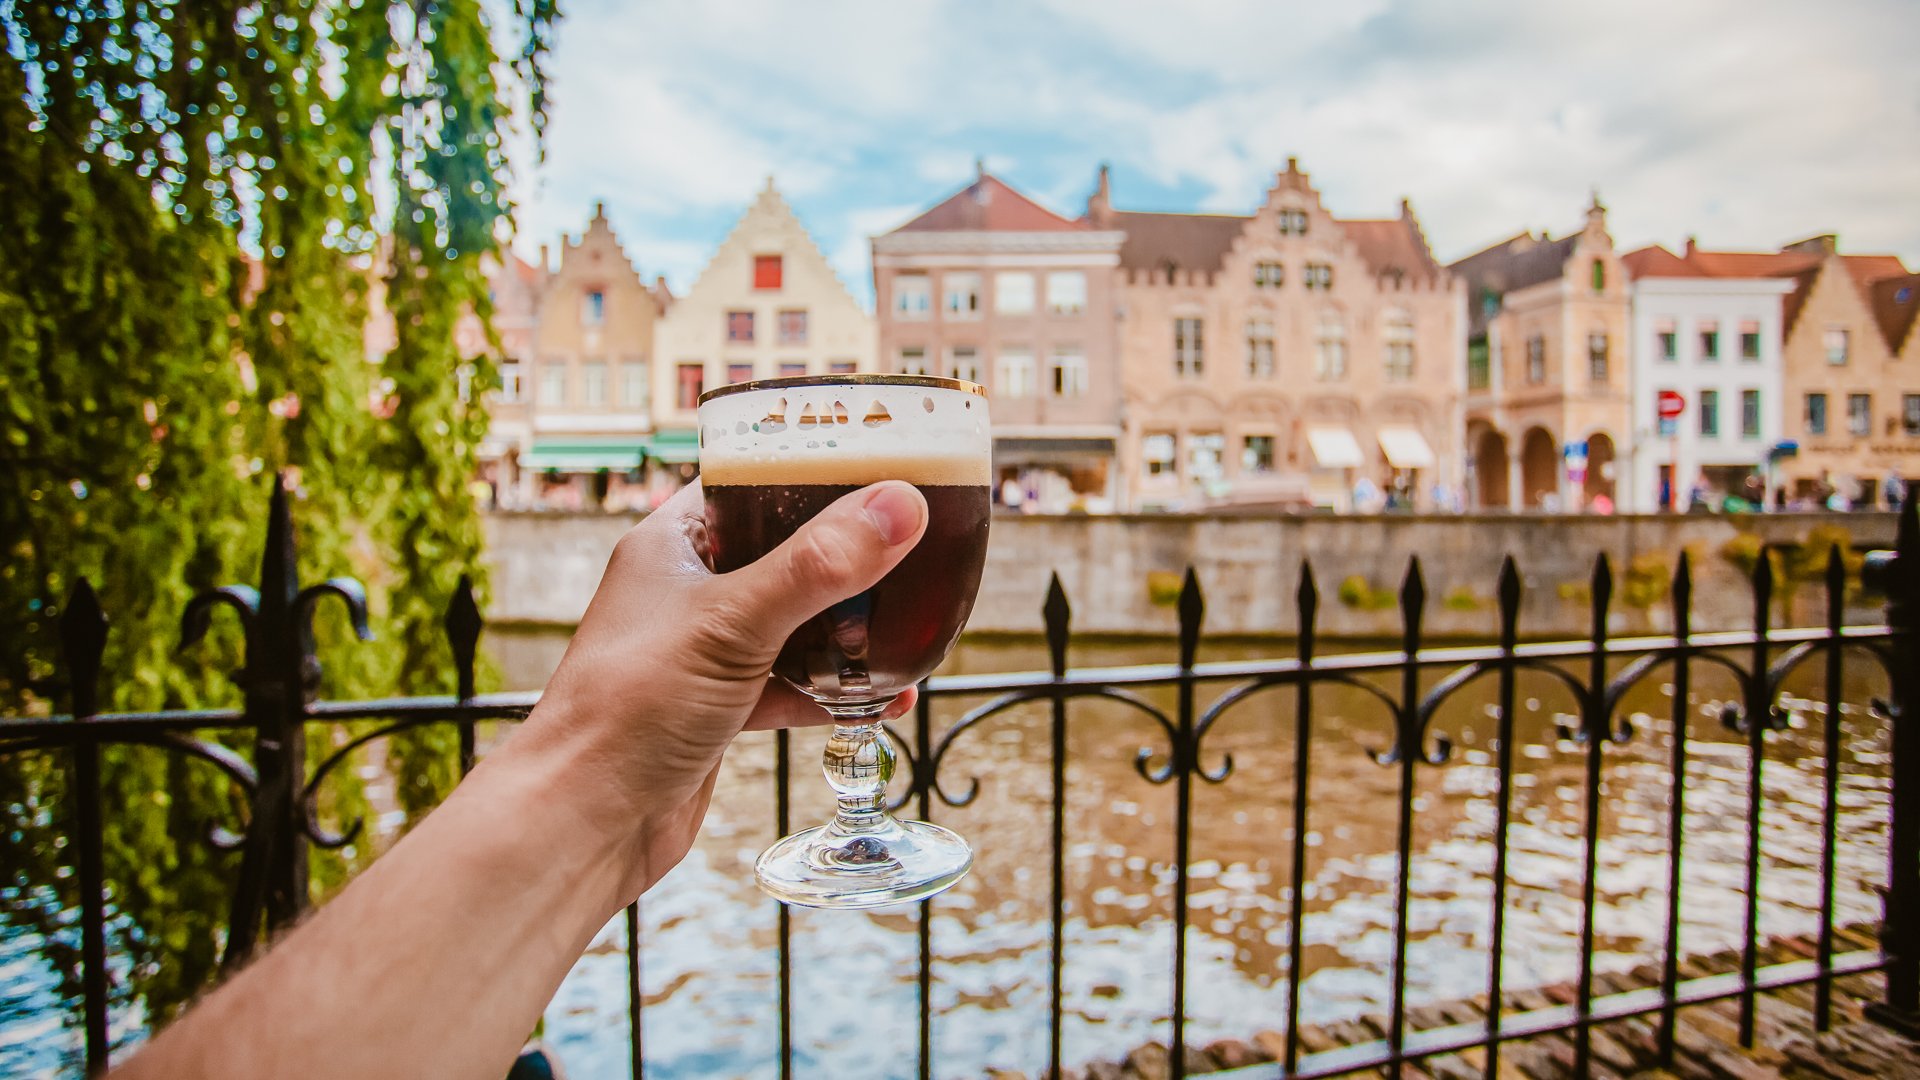 A hand holds a full glass of dark Belgian beer near a canal in Bruges, Belgium with old buildings in the background.